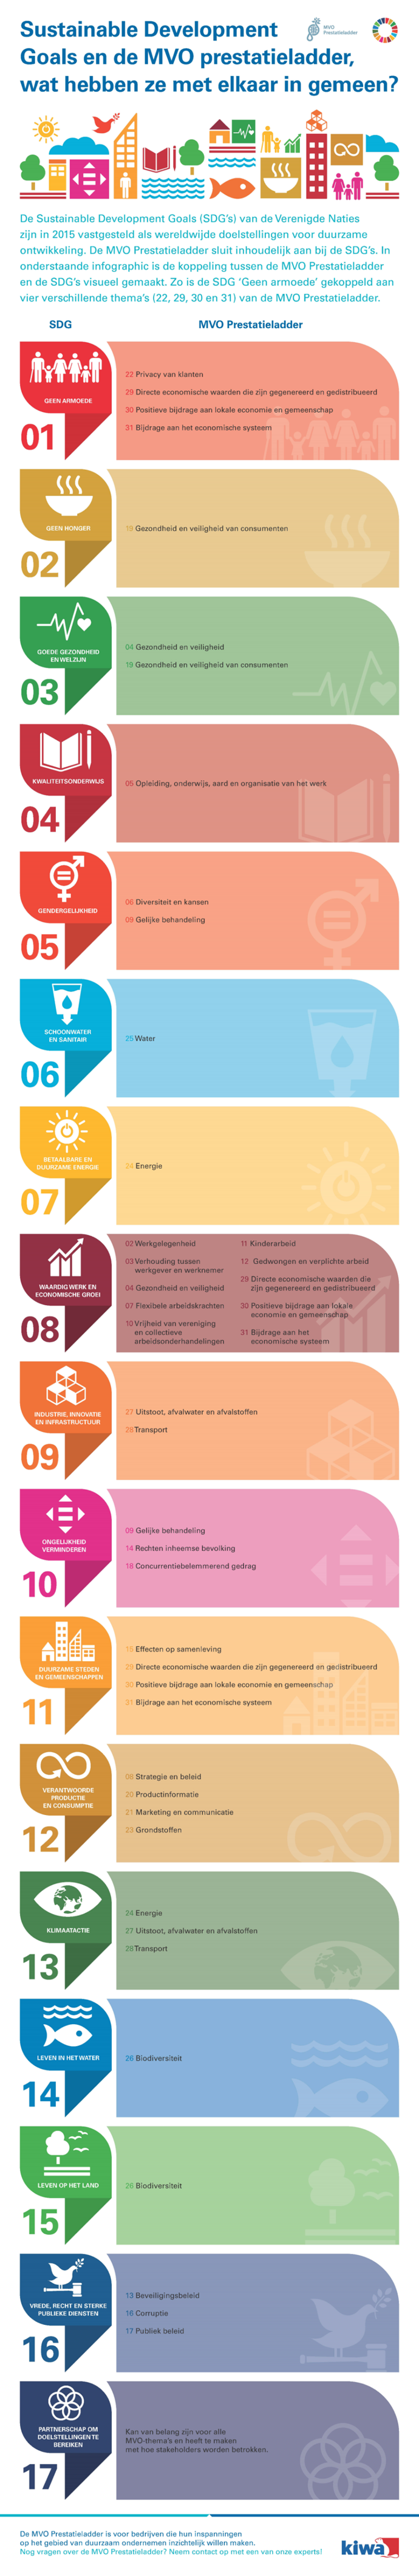 Infographic MVO_SDG_UPD_900x5528.png